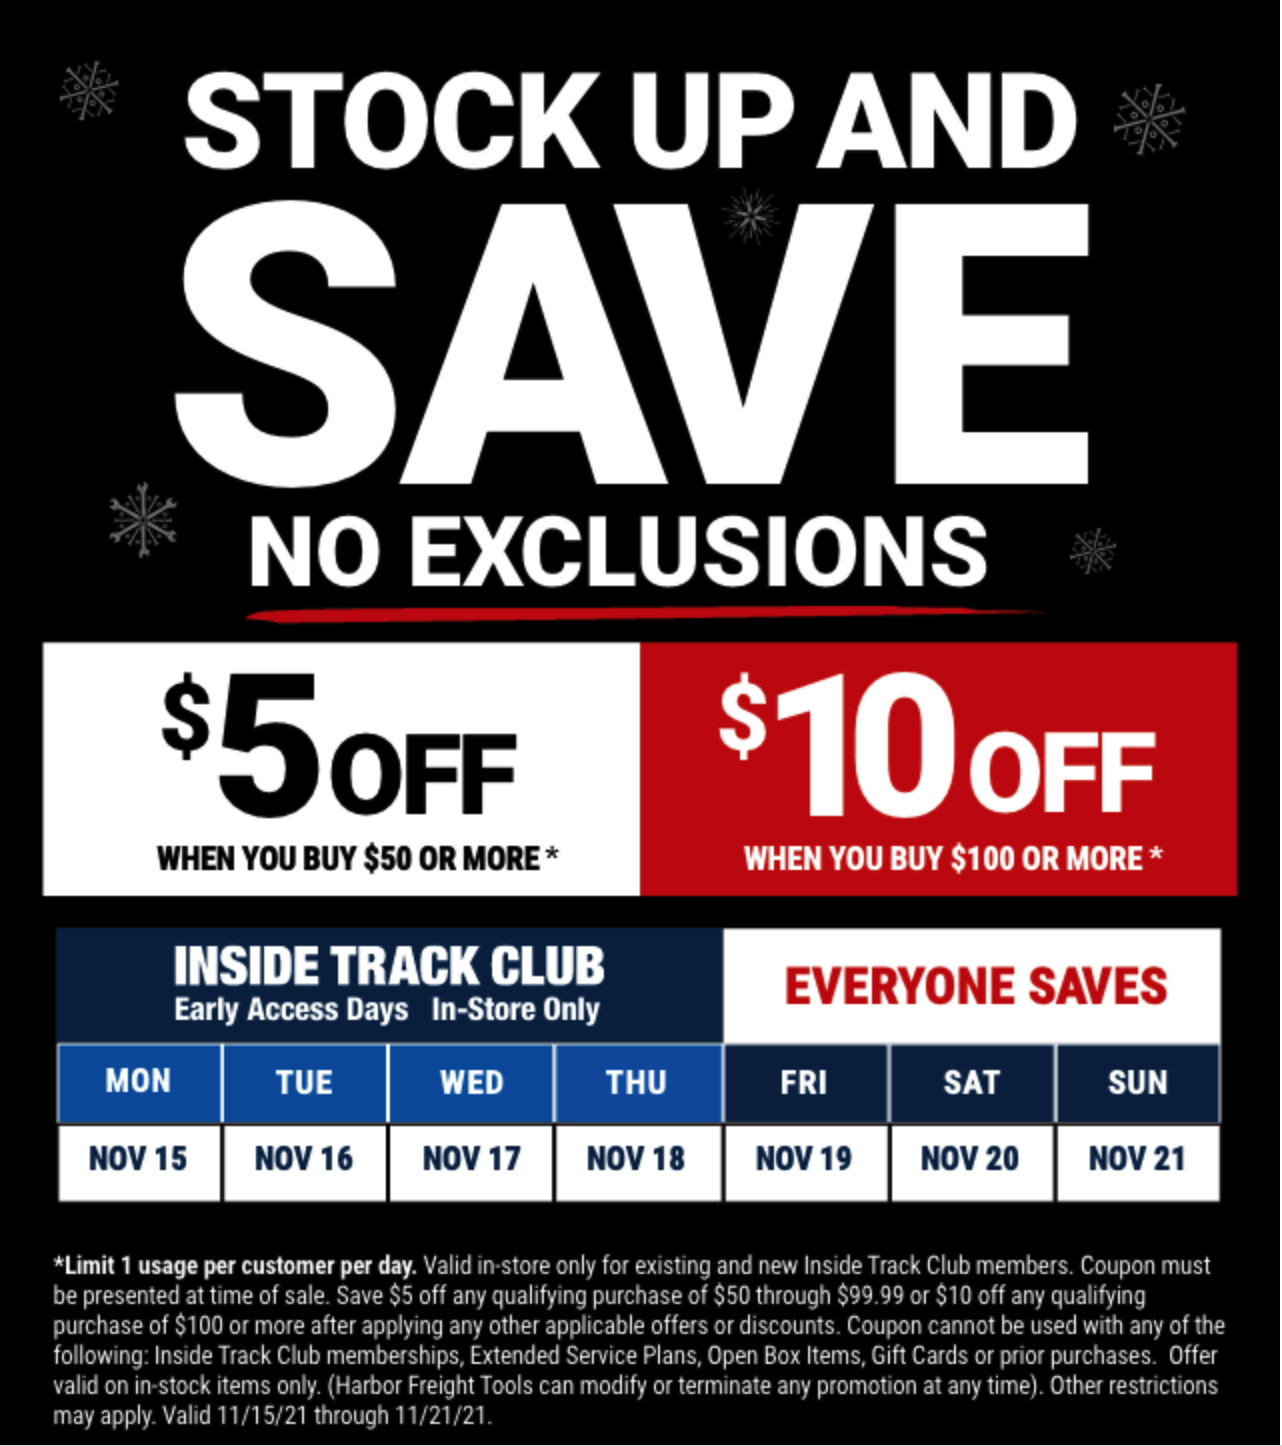 Harbor Freight Stock Up and Save $5 off $50 or $10 off $100 ITC early access 11/15/21 - 11/18/21, Everyone else 11/19/21 - 11/21/21